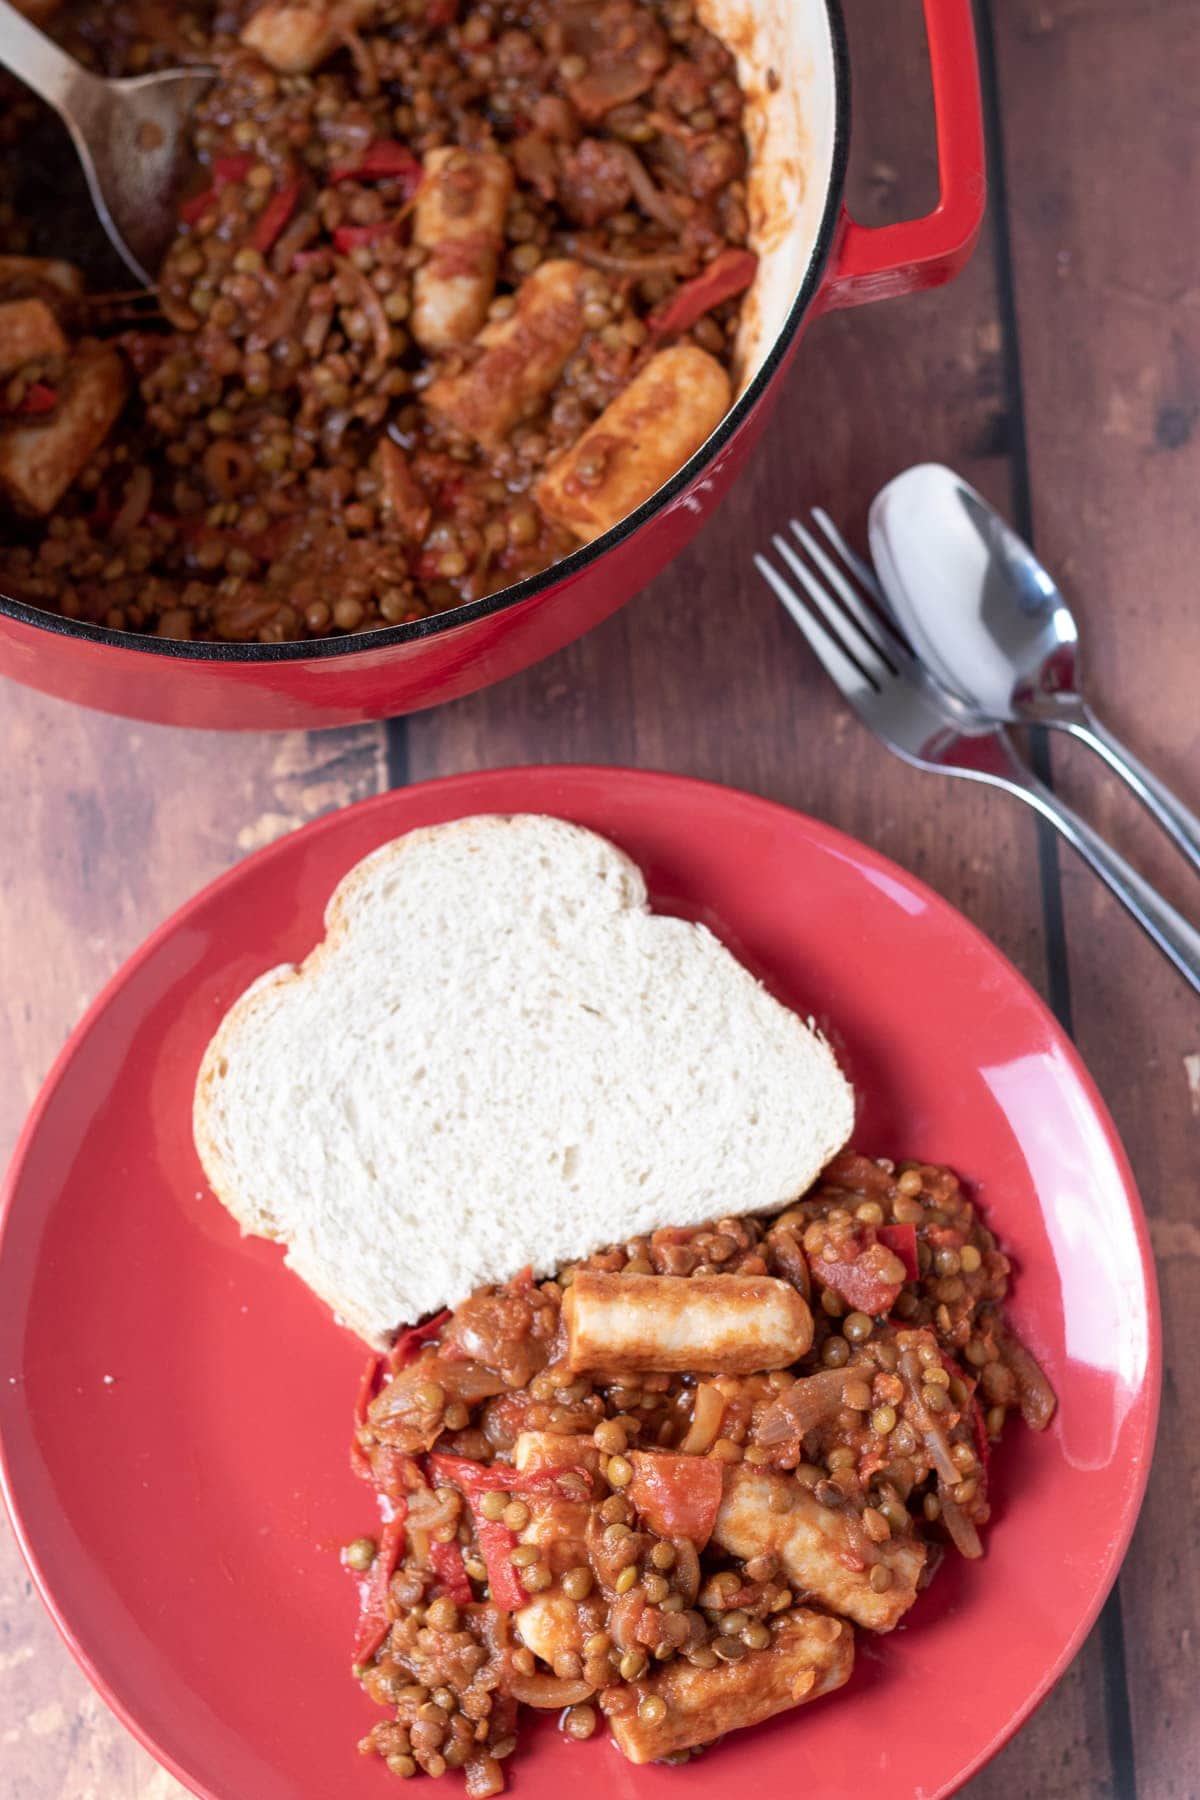 Birds eye view of a plate of sausage lentil casserole with a slice of bread. Rest of the casserole in a casserole pot and a knife and fork to the side.